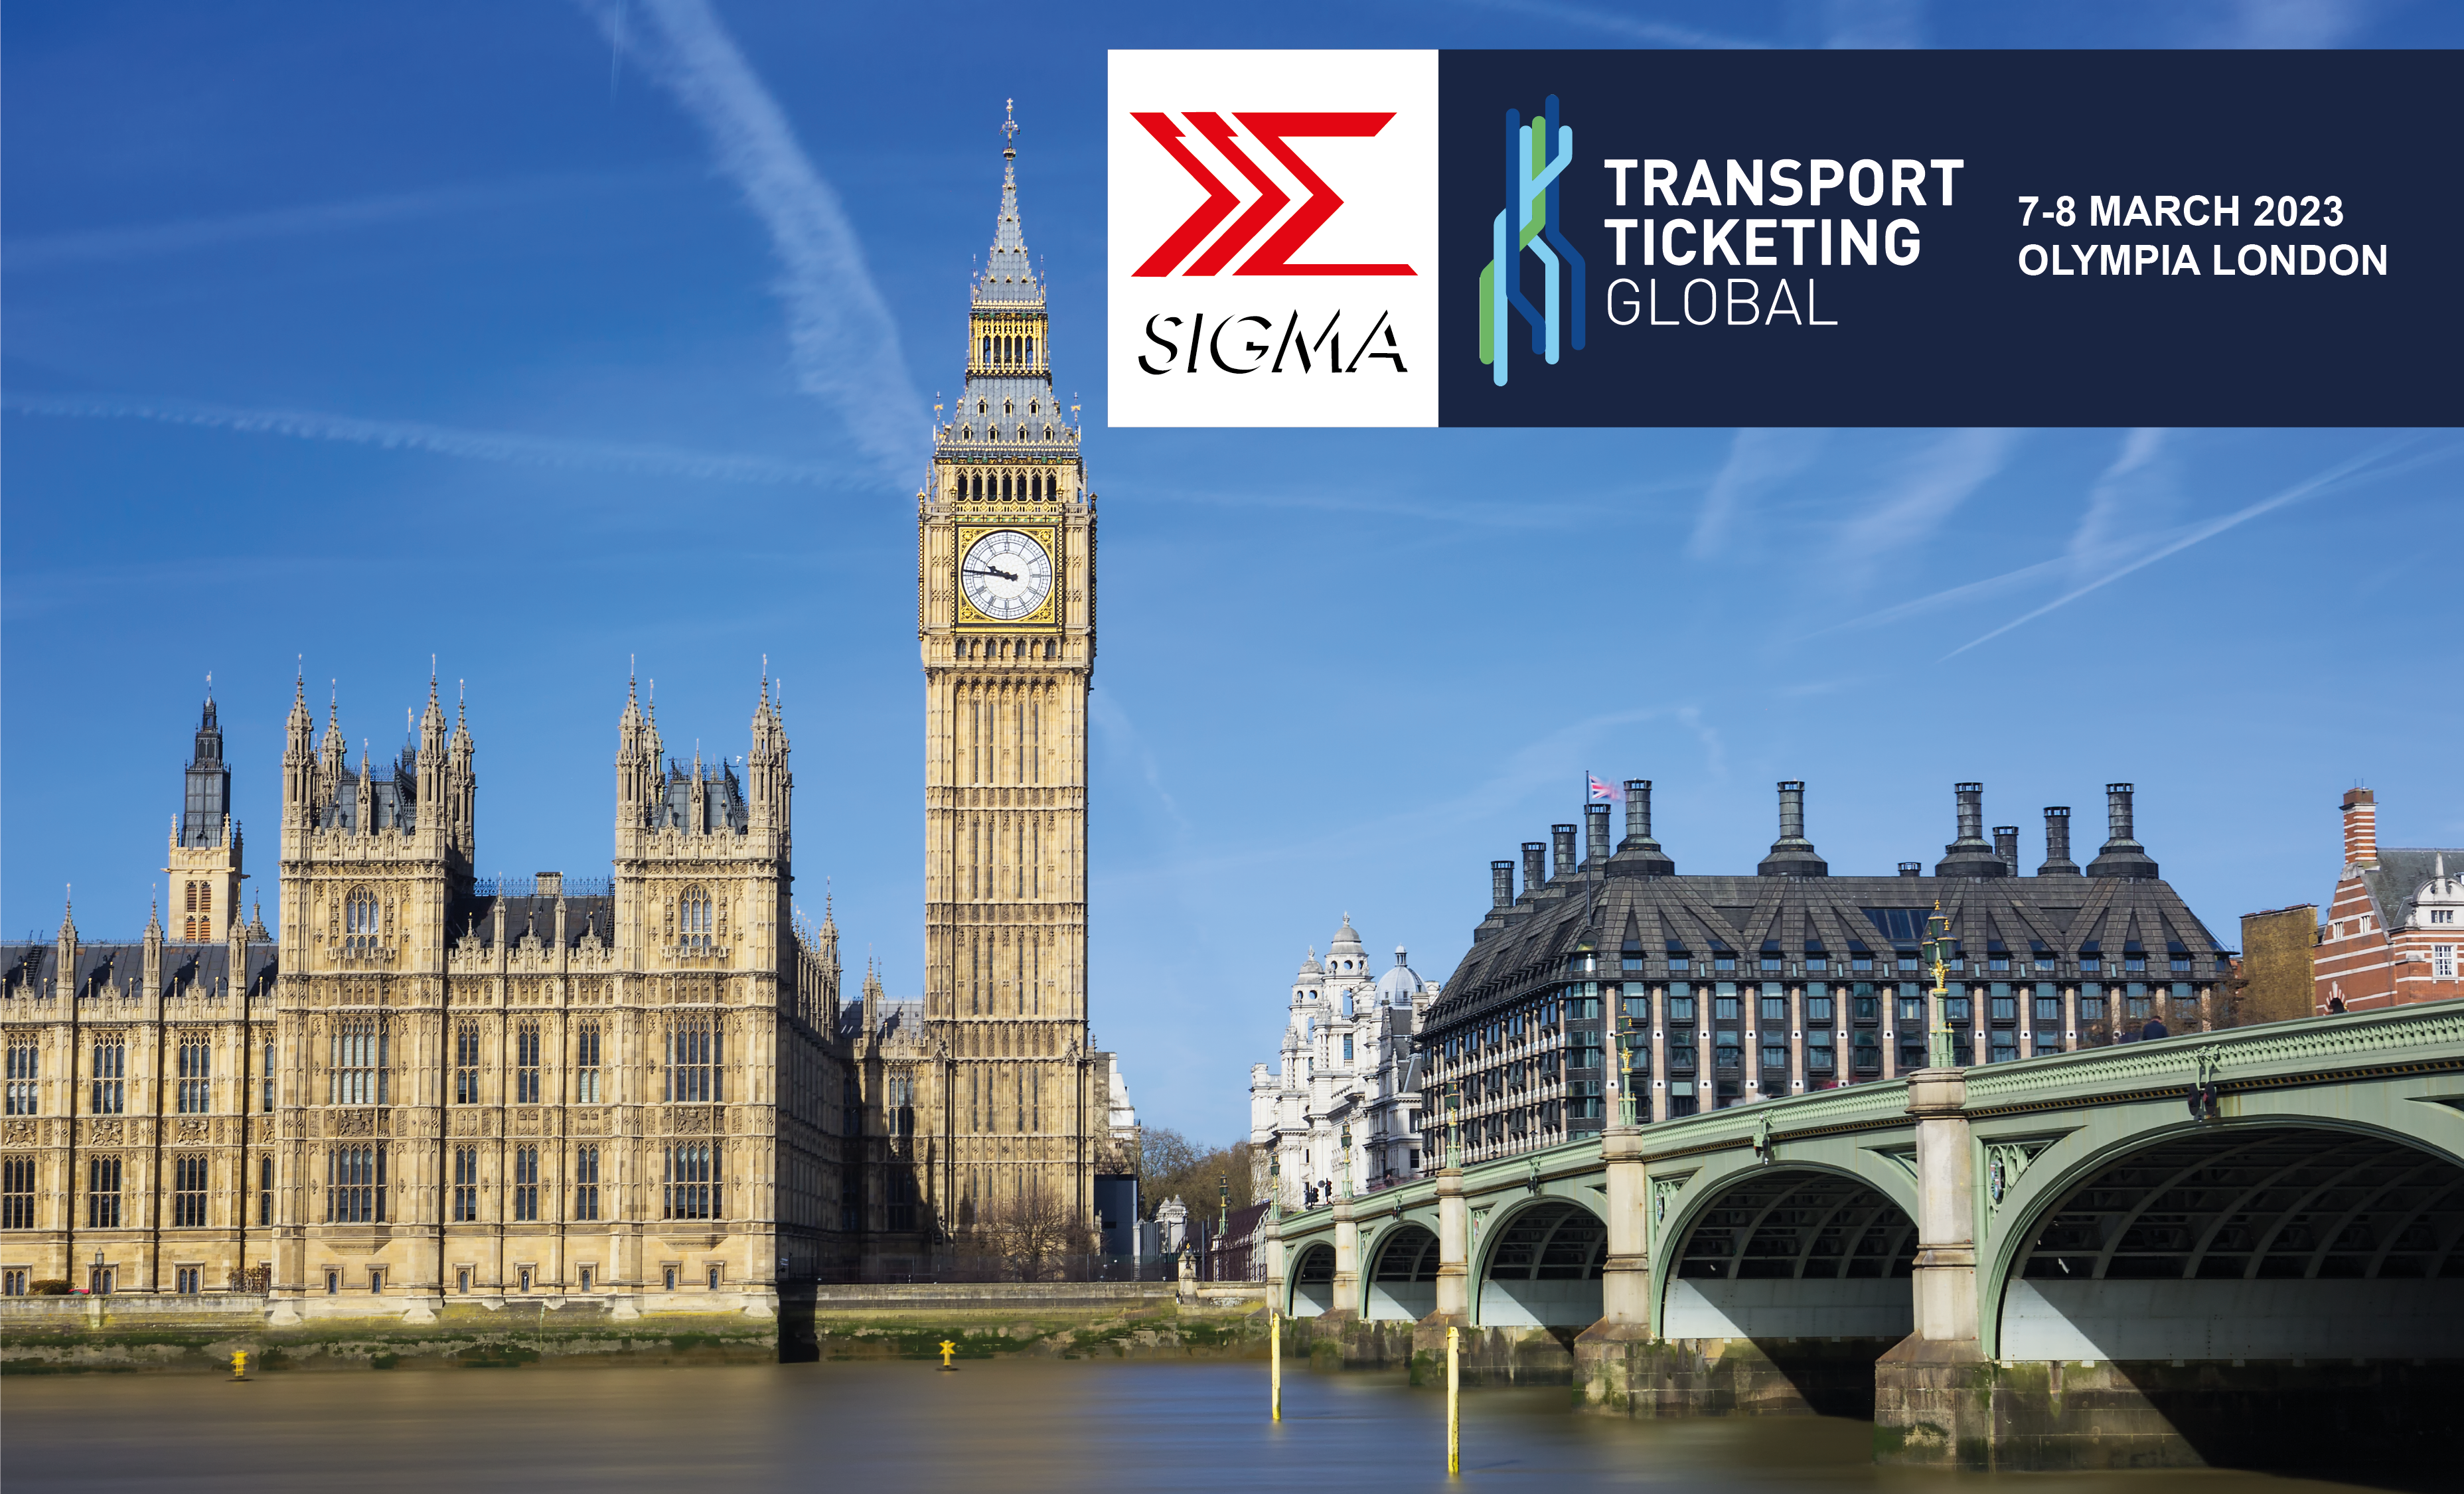 SIGMA Spa will once again exhibit at Transport Ticketing Global in London, the most important event in the Transport Ticketing sector